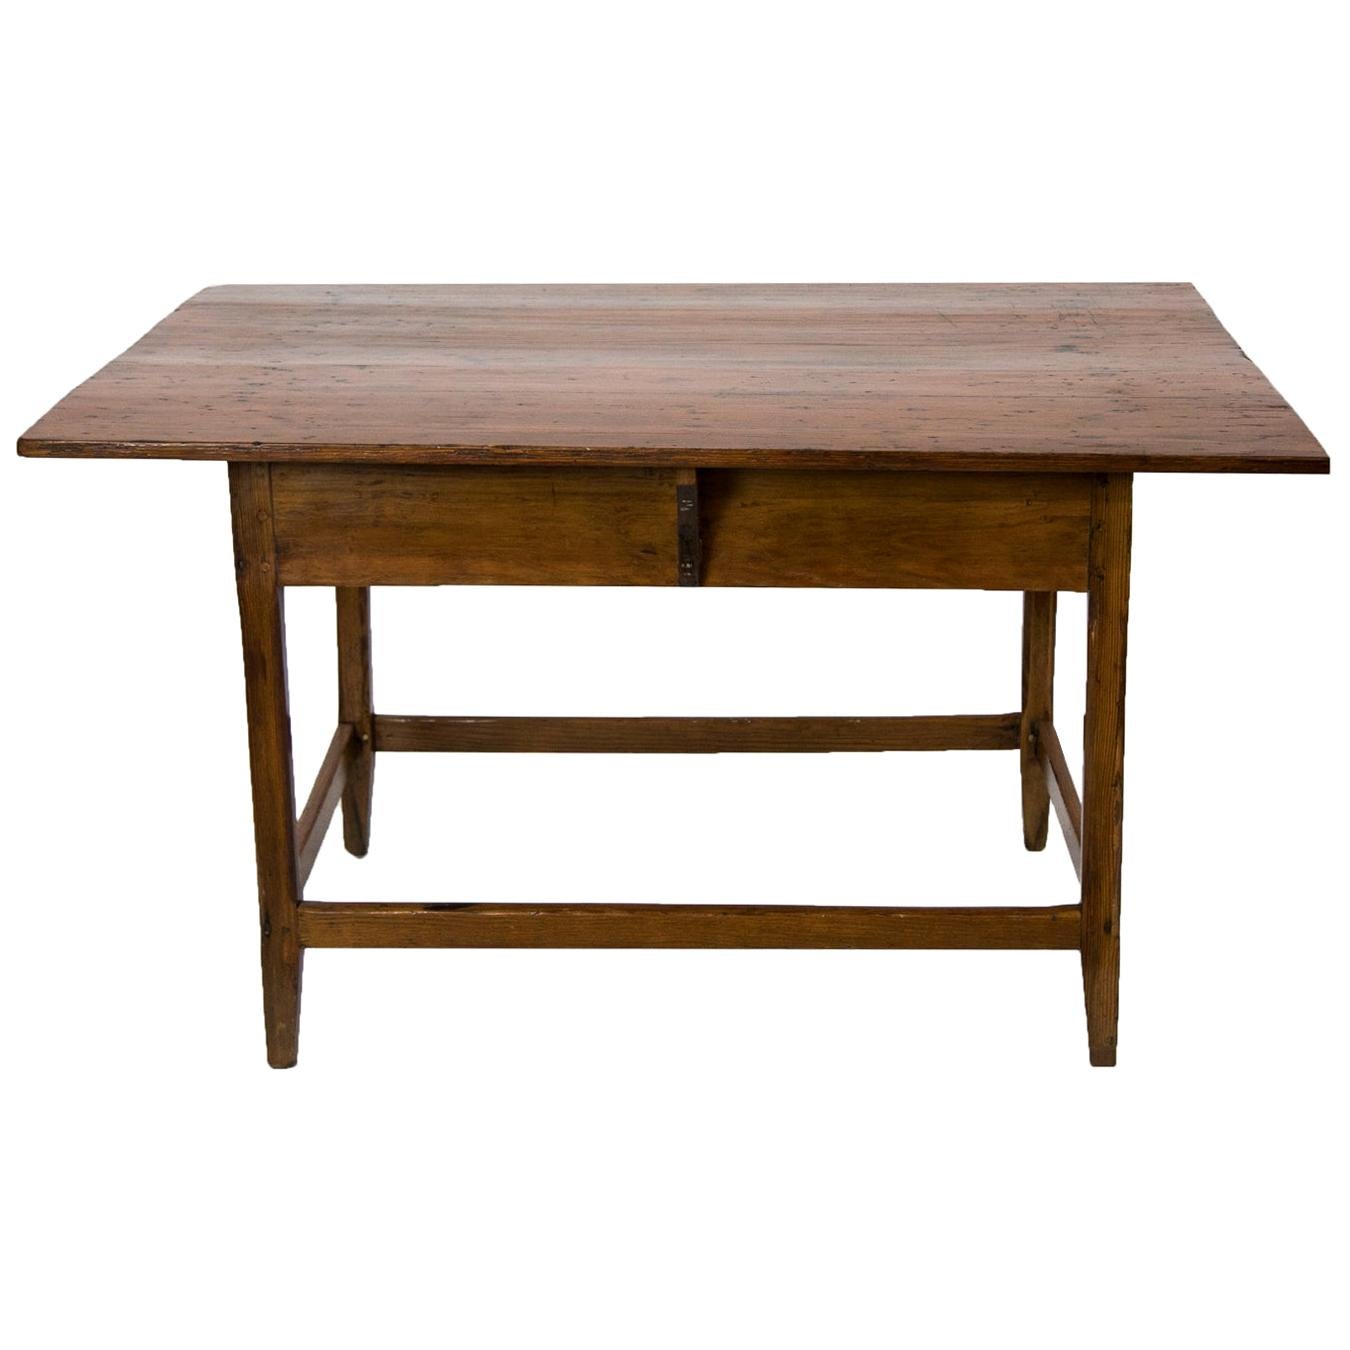  American Pine Stretcher Base Table